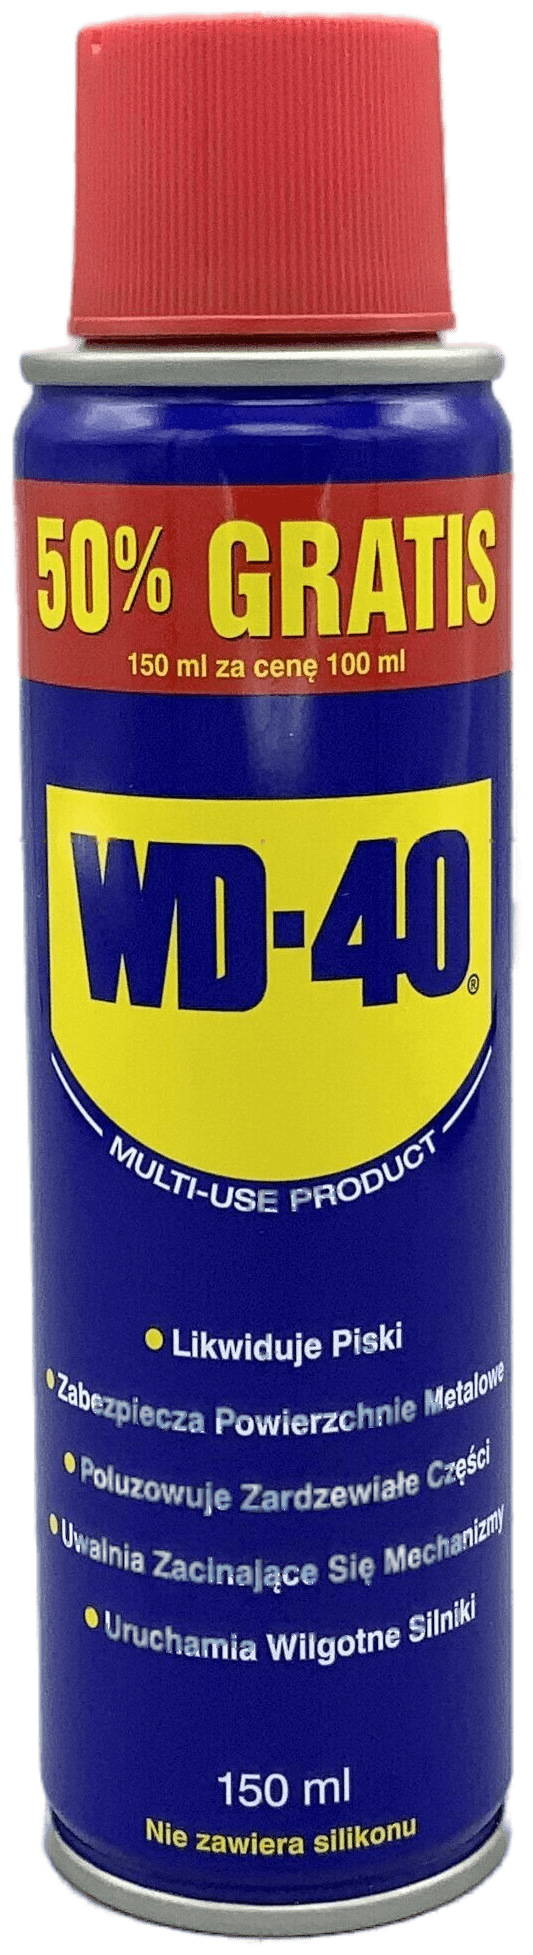  WD-40   0.15 